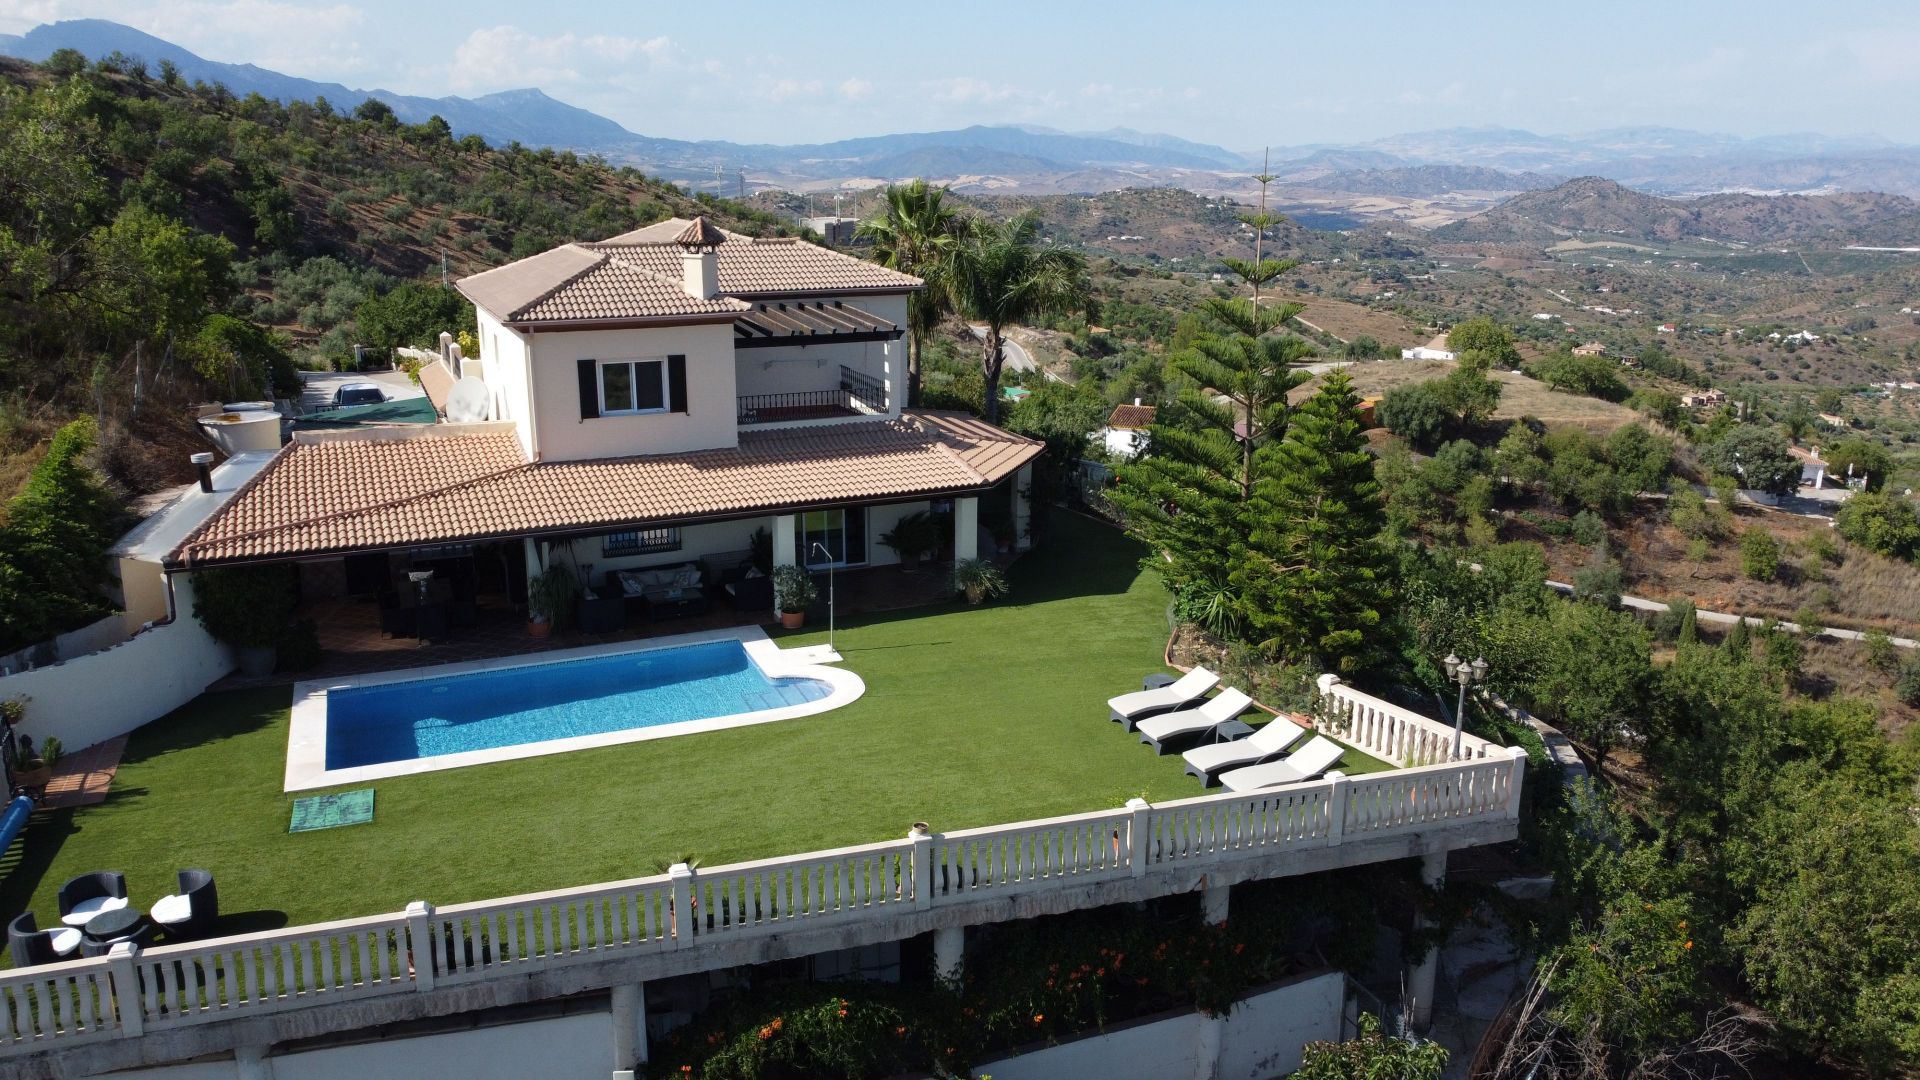 8 Bedroom Country House In Monda Property Luxury Holiday Villas And Homes